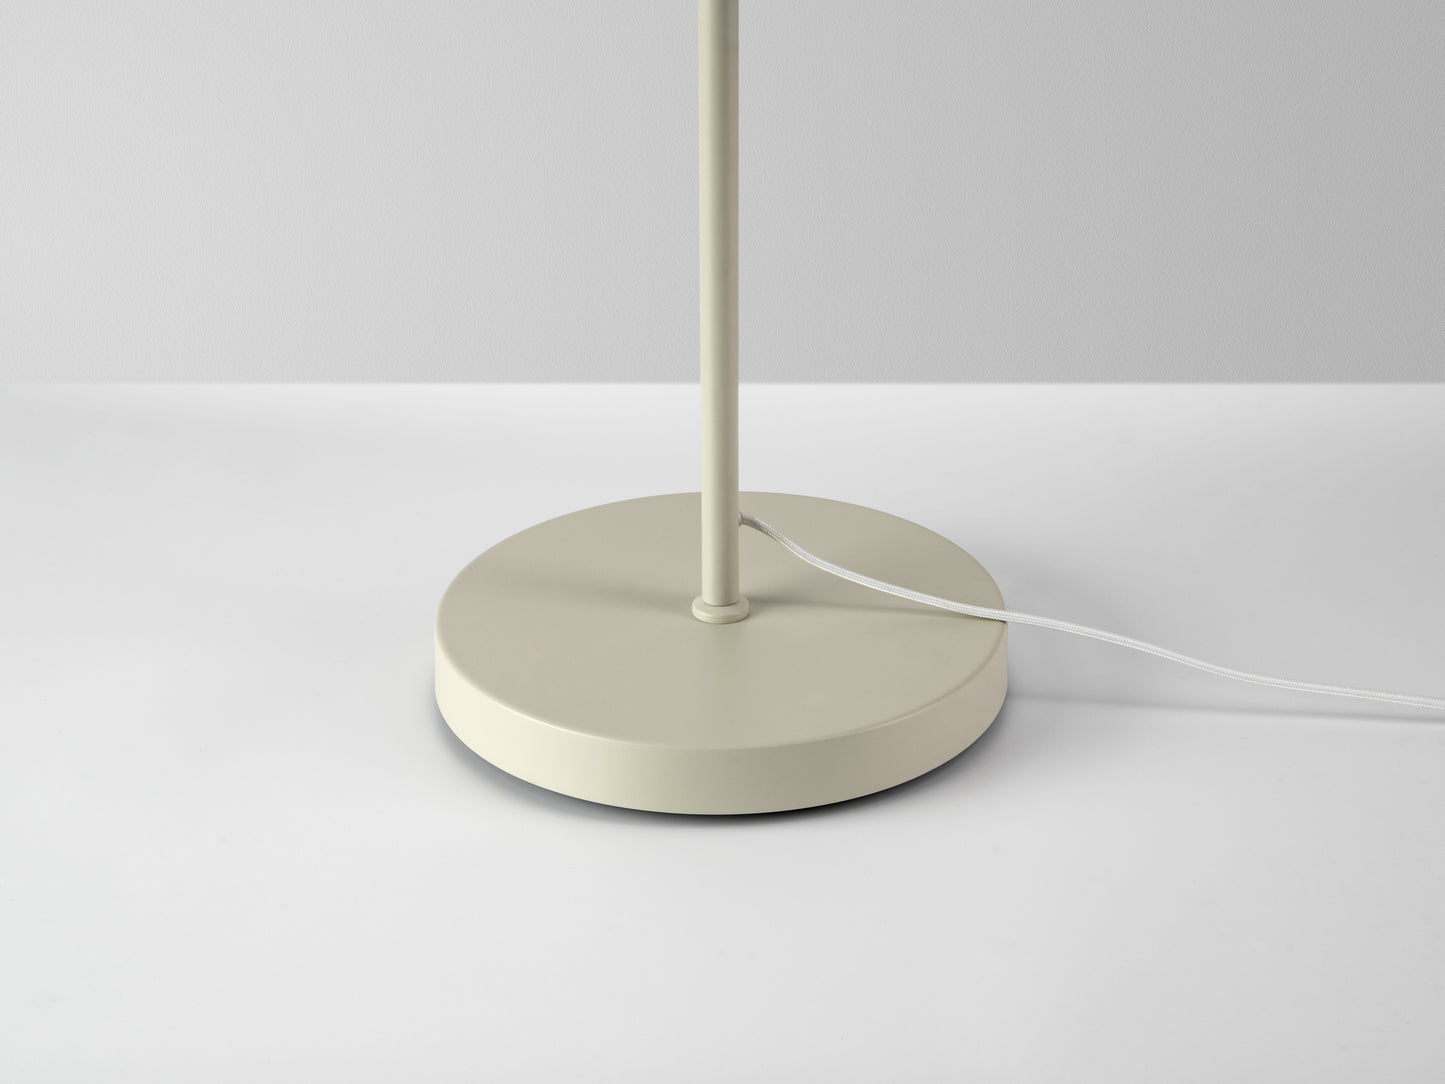 sand Opal Disk Floor Lamp, stand close up view.